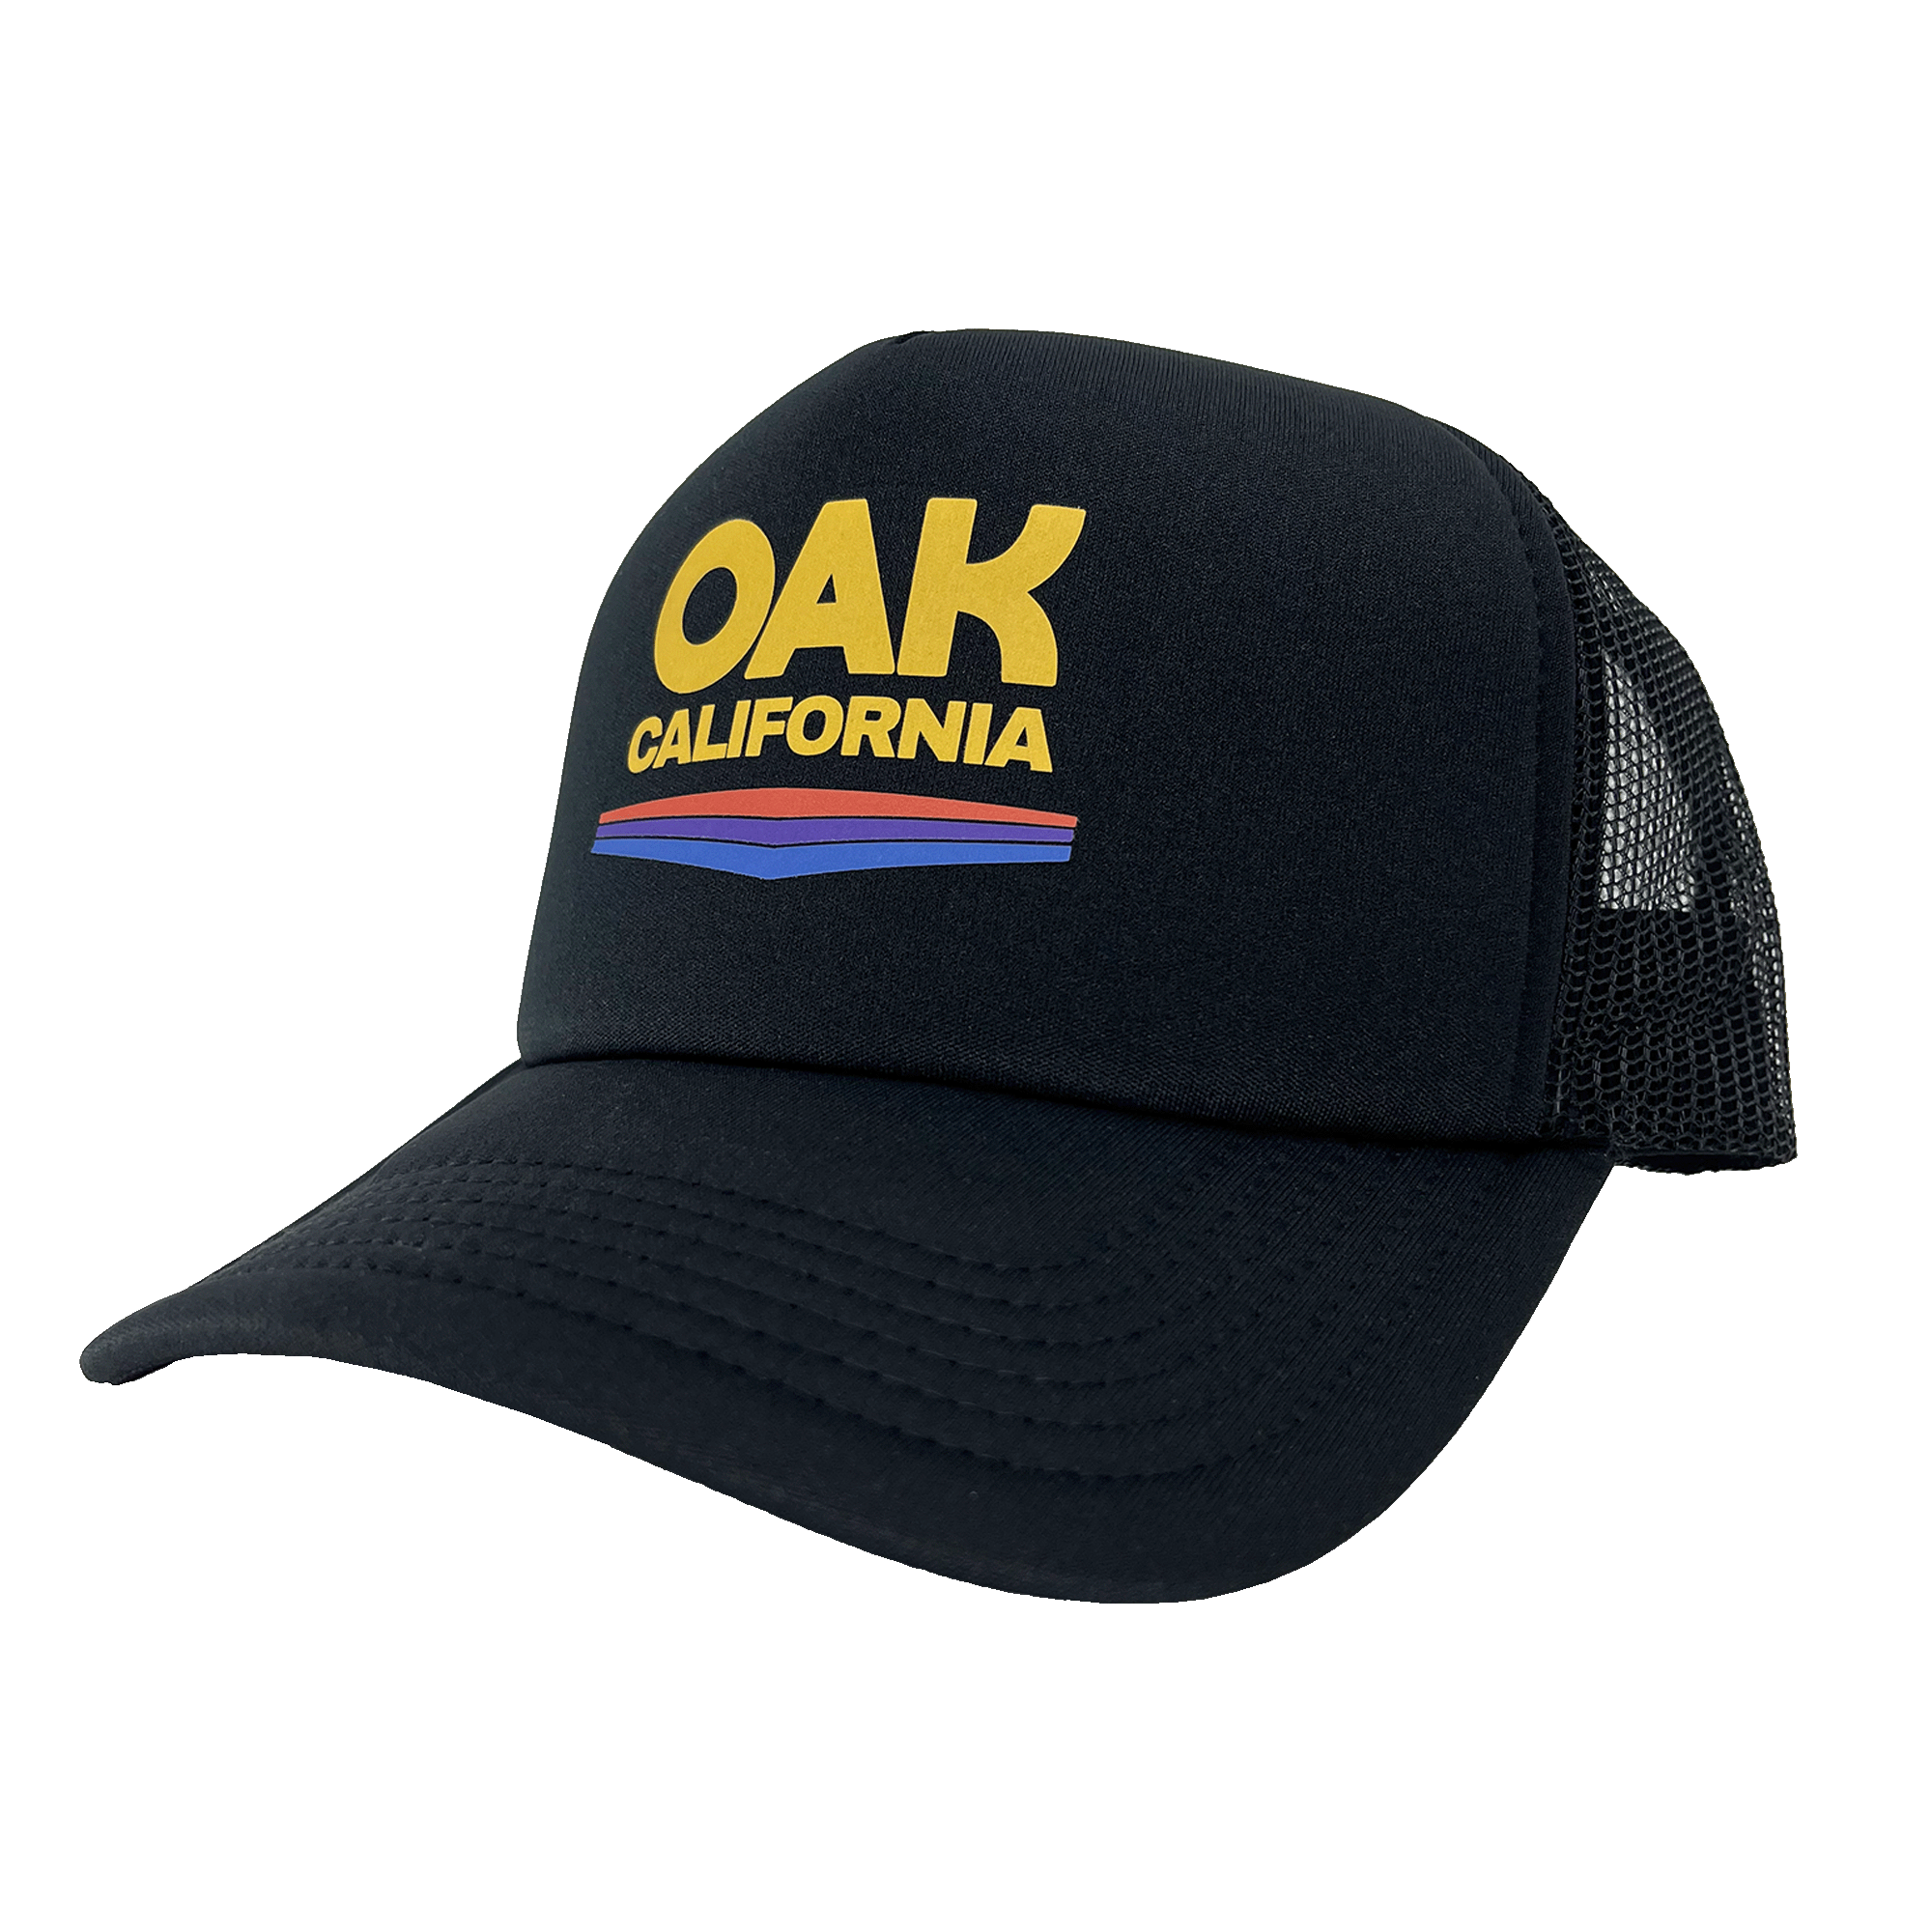 Side view of black truckers cap with color Oak California graphic on front foam panel with curved brim.